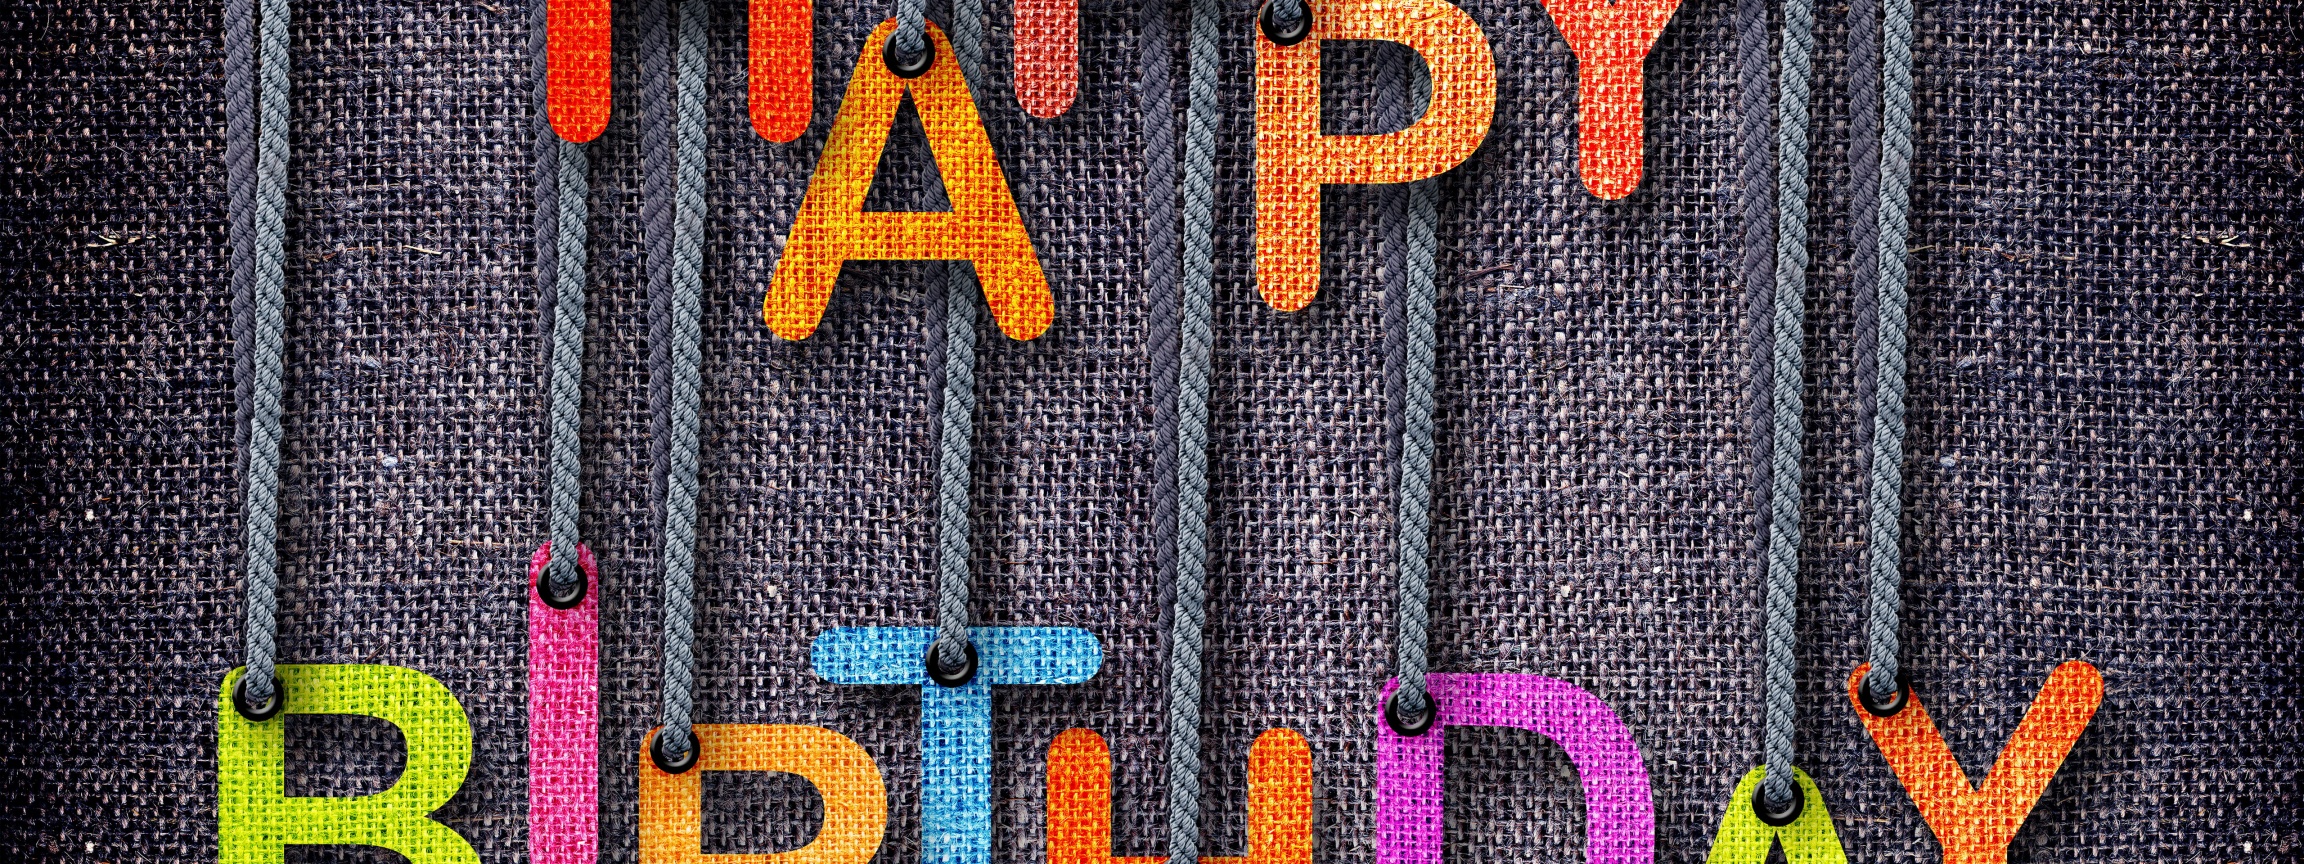 Happy Birthday With Colorful Letters